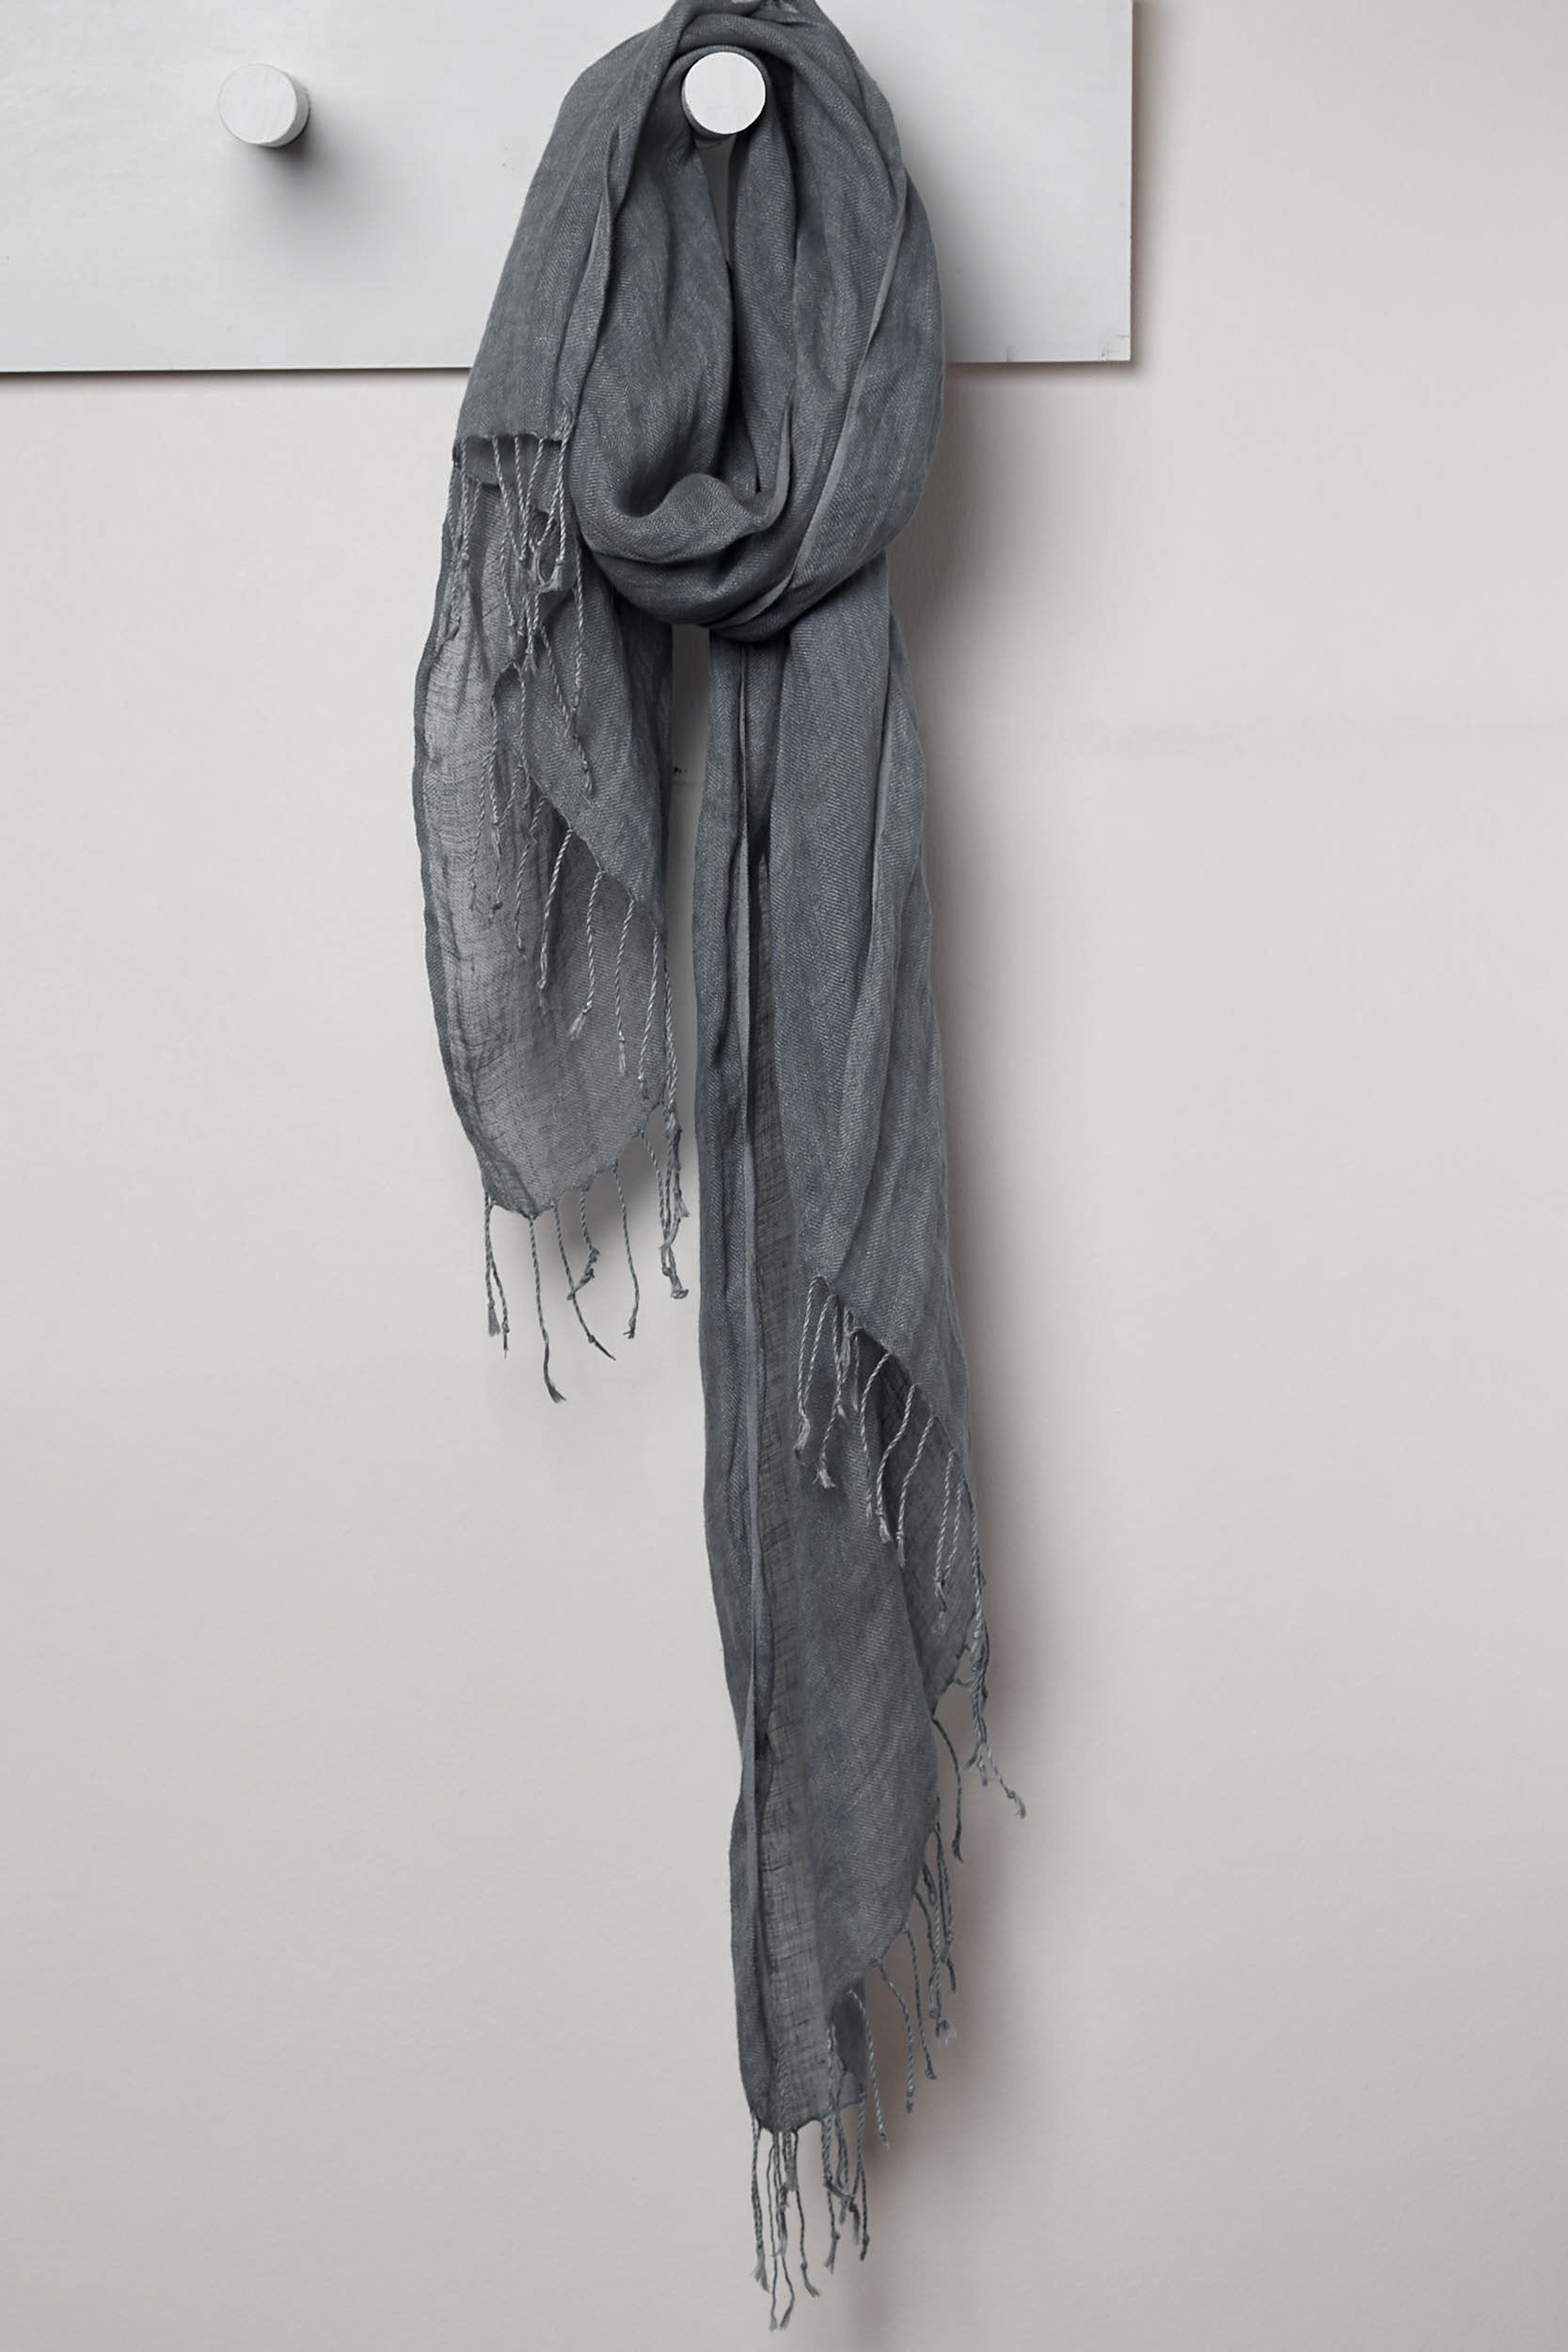 3 Visits To Cairo pure linen scarf in Storm. looped around a hook detailing the linen texture and thin tassels tied at the short edges of the scarf.